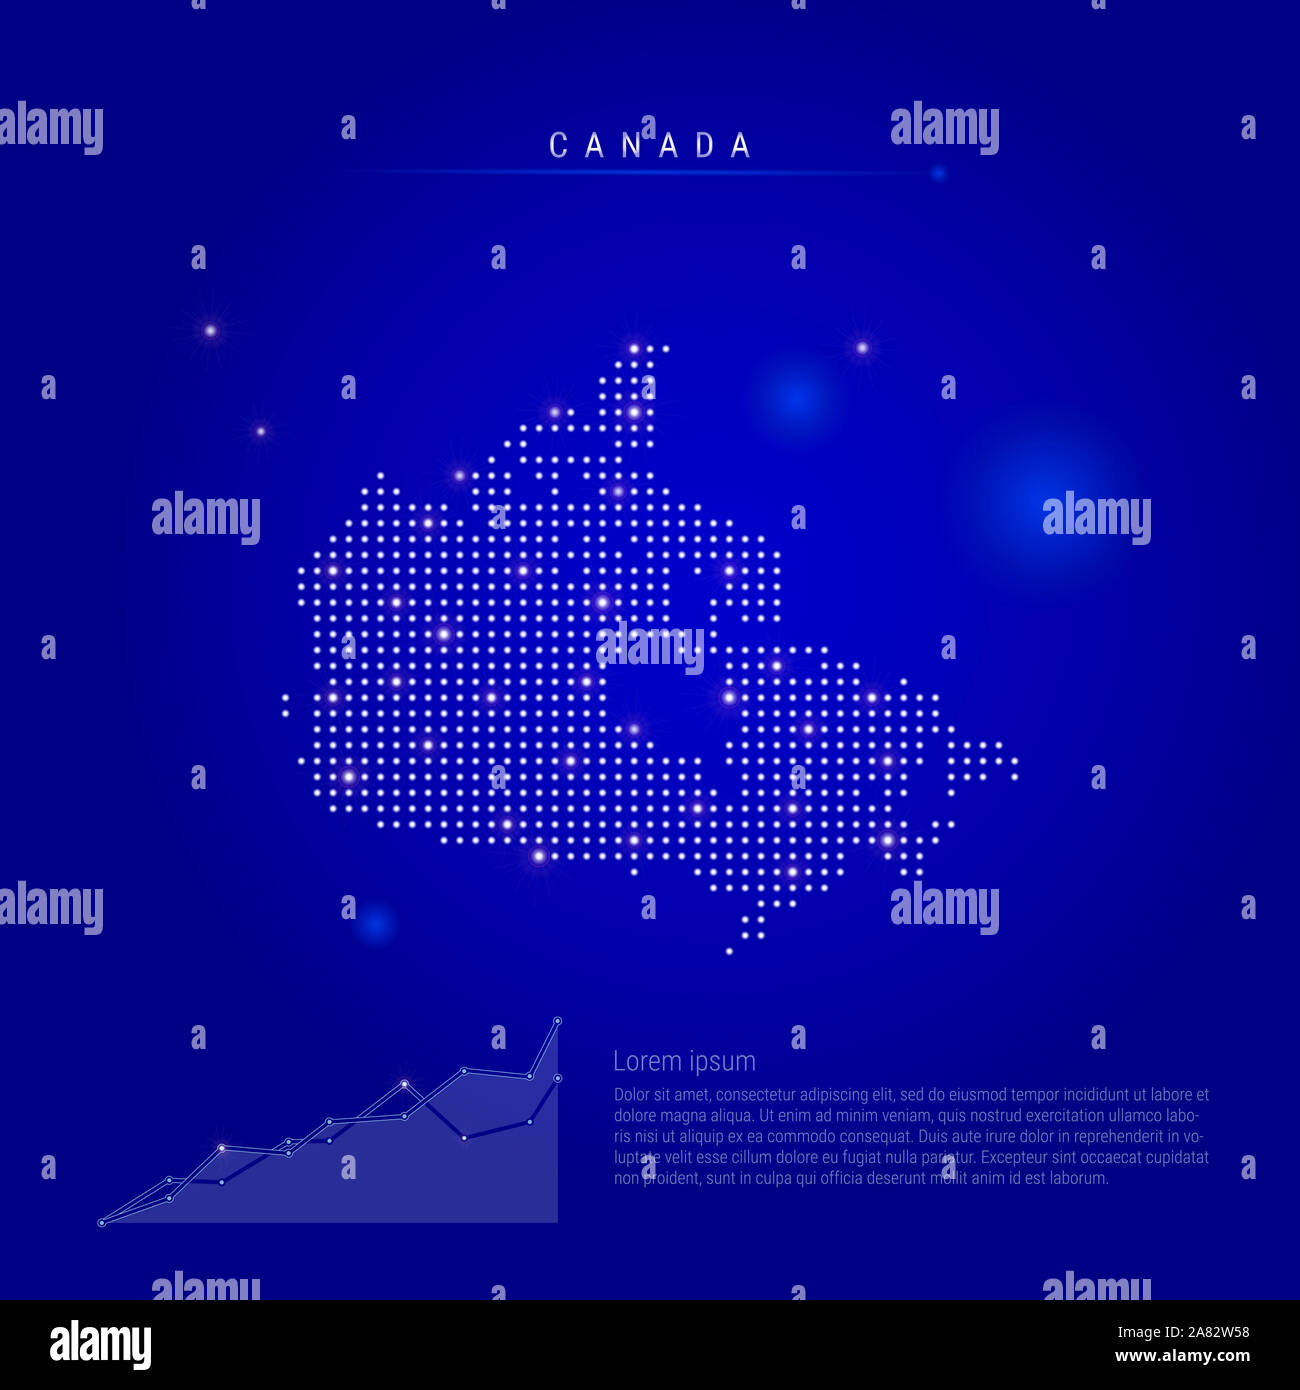 Canada illuminated map with glowing dots. Dark blue space background. illustration. Growing chart, lorem ipsum text. Stock Photo